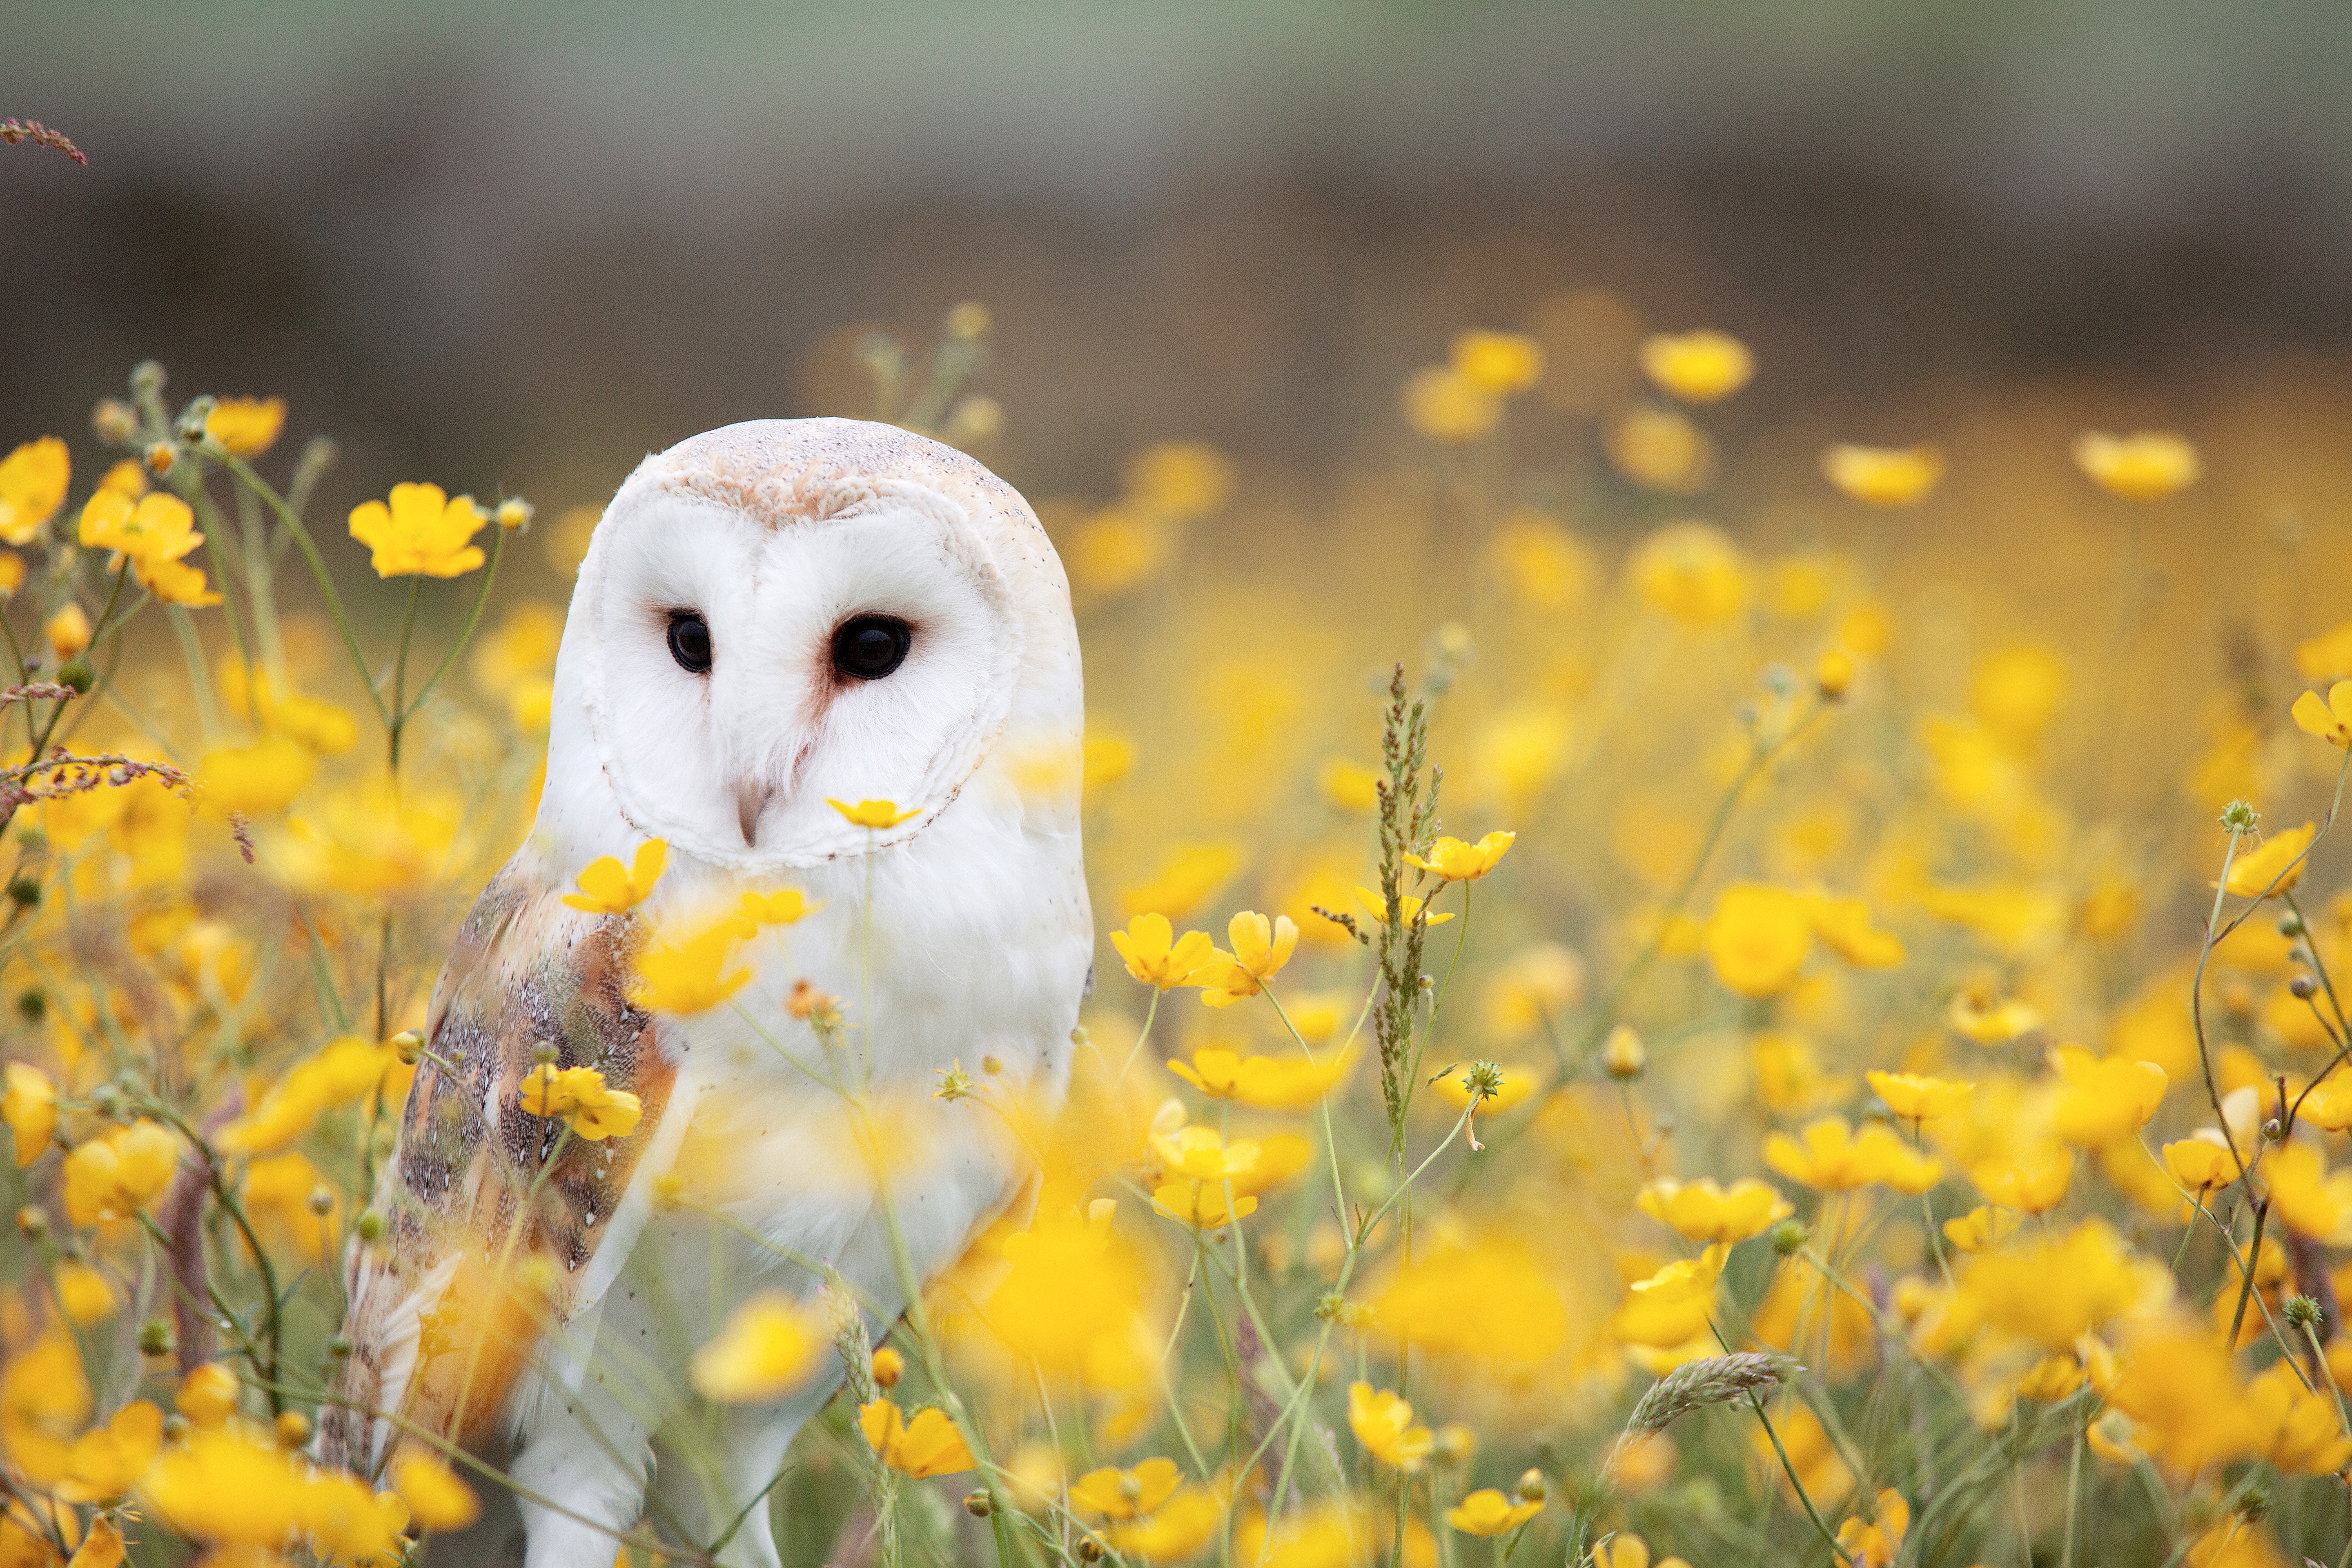 White and beige owl surrounded by yellow flowers